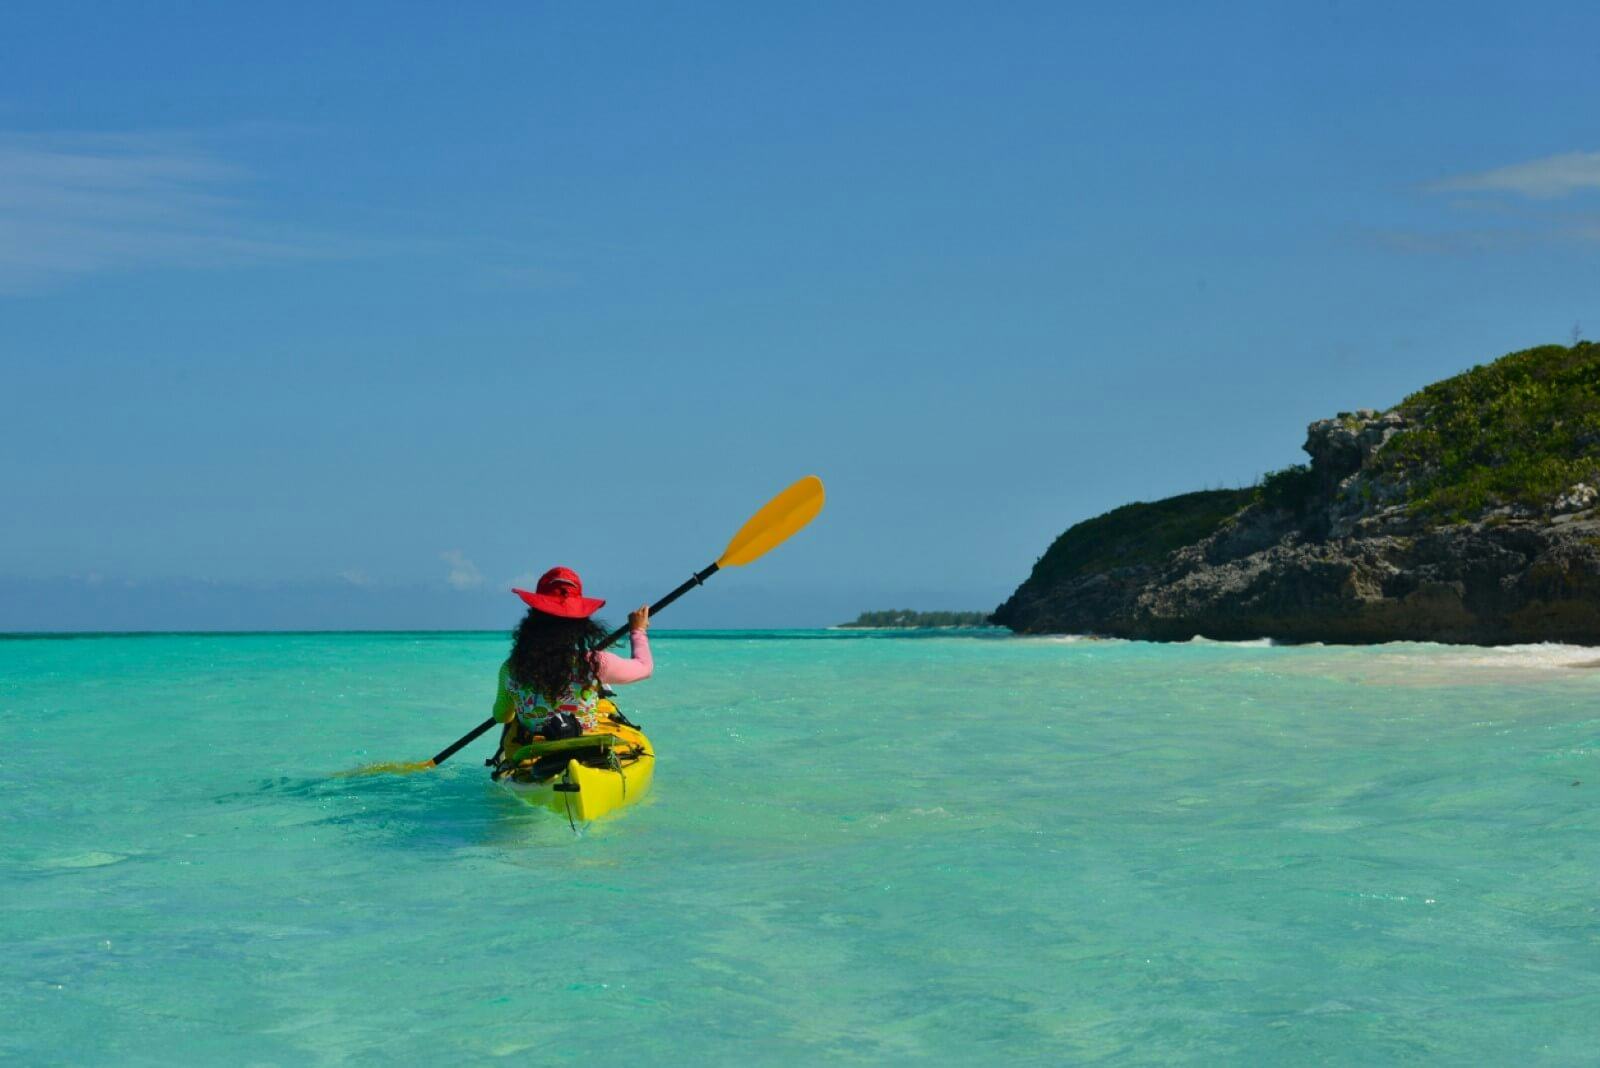 A woman kayaking in the Caribbean Sea